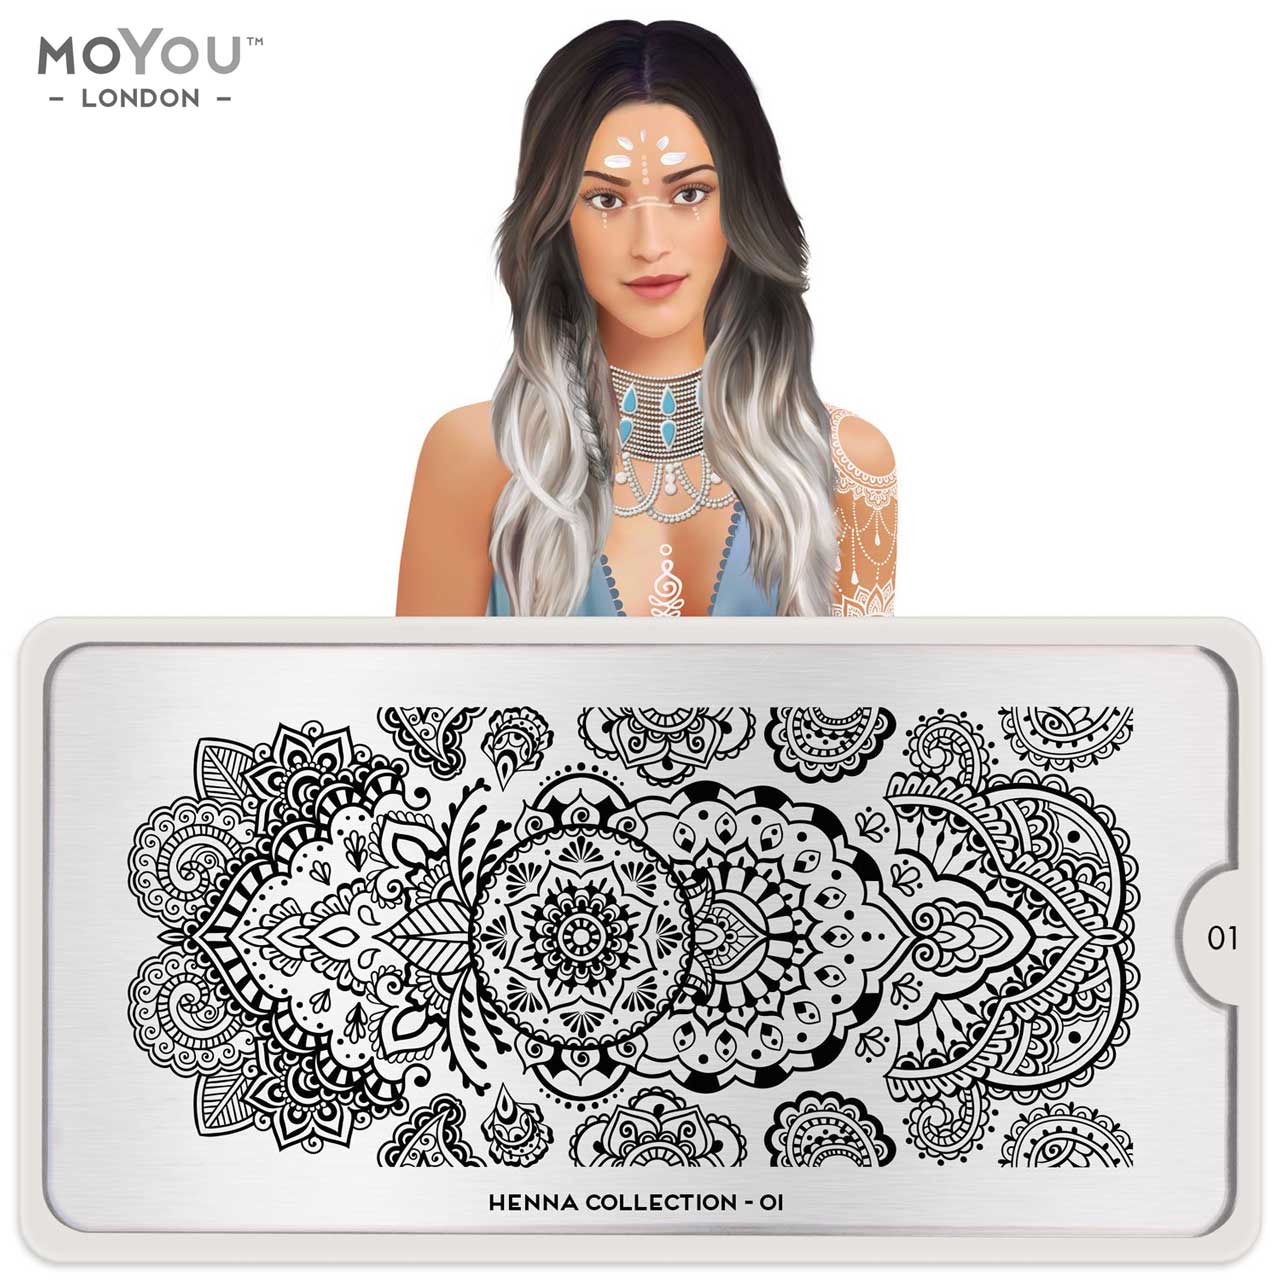 Plaque Stamping Henna 01 - MoYou London